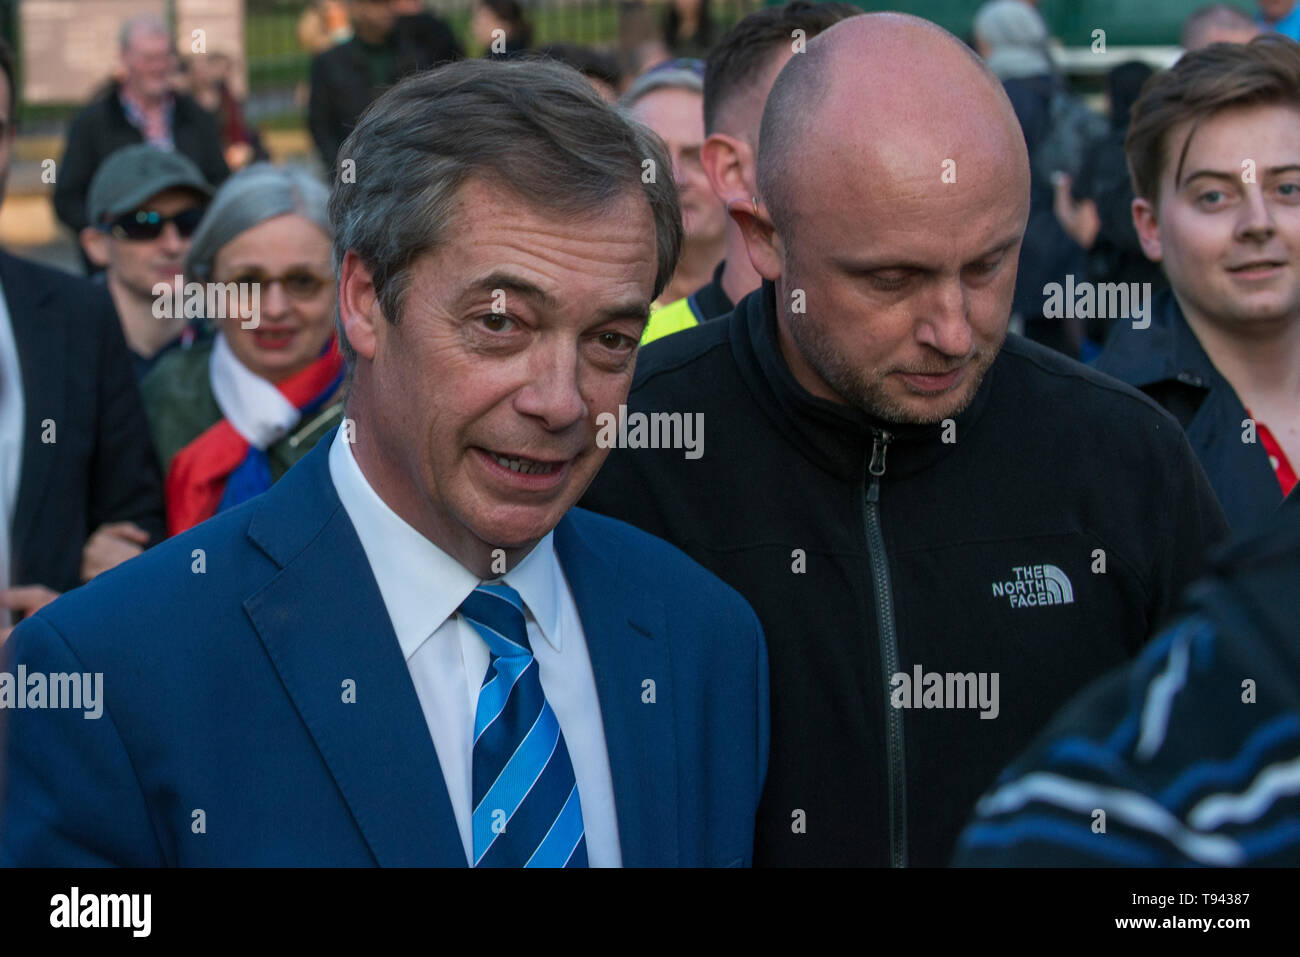 Nigel Farage leaving the stage after his speech at Parliament Square on March 29th 2019 The day the Britain was meant to leave the EU. Stock Photo